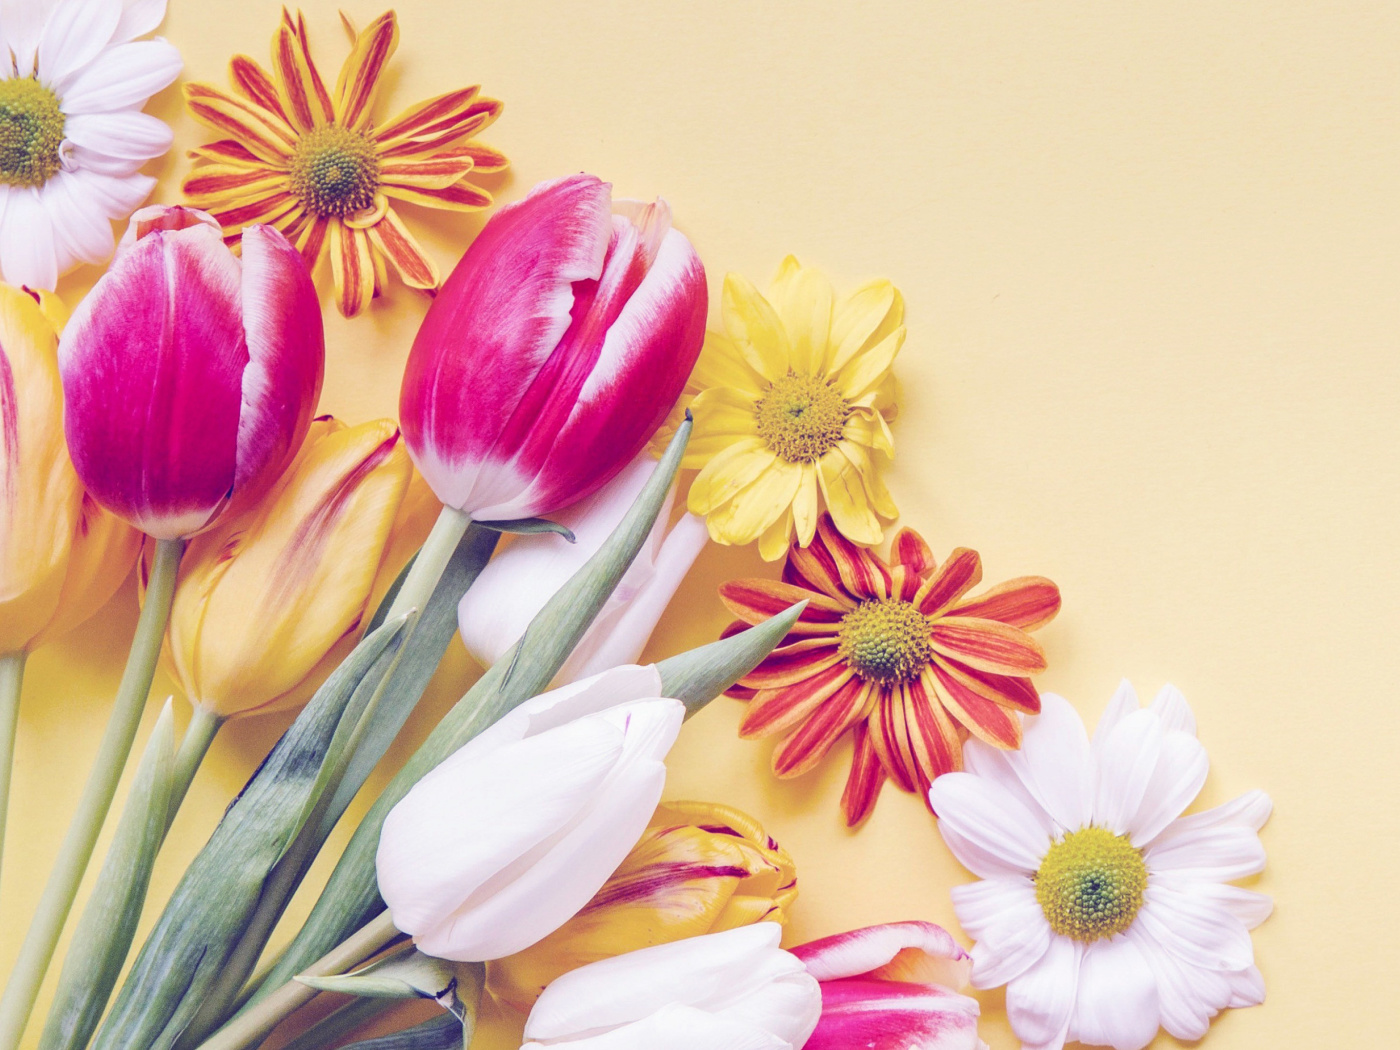 Spring tulips on yellow background wallpaper 1400x1050